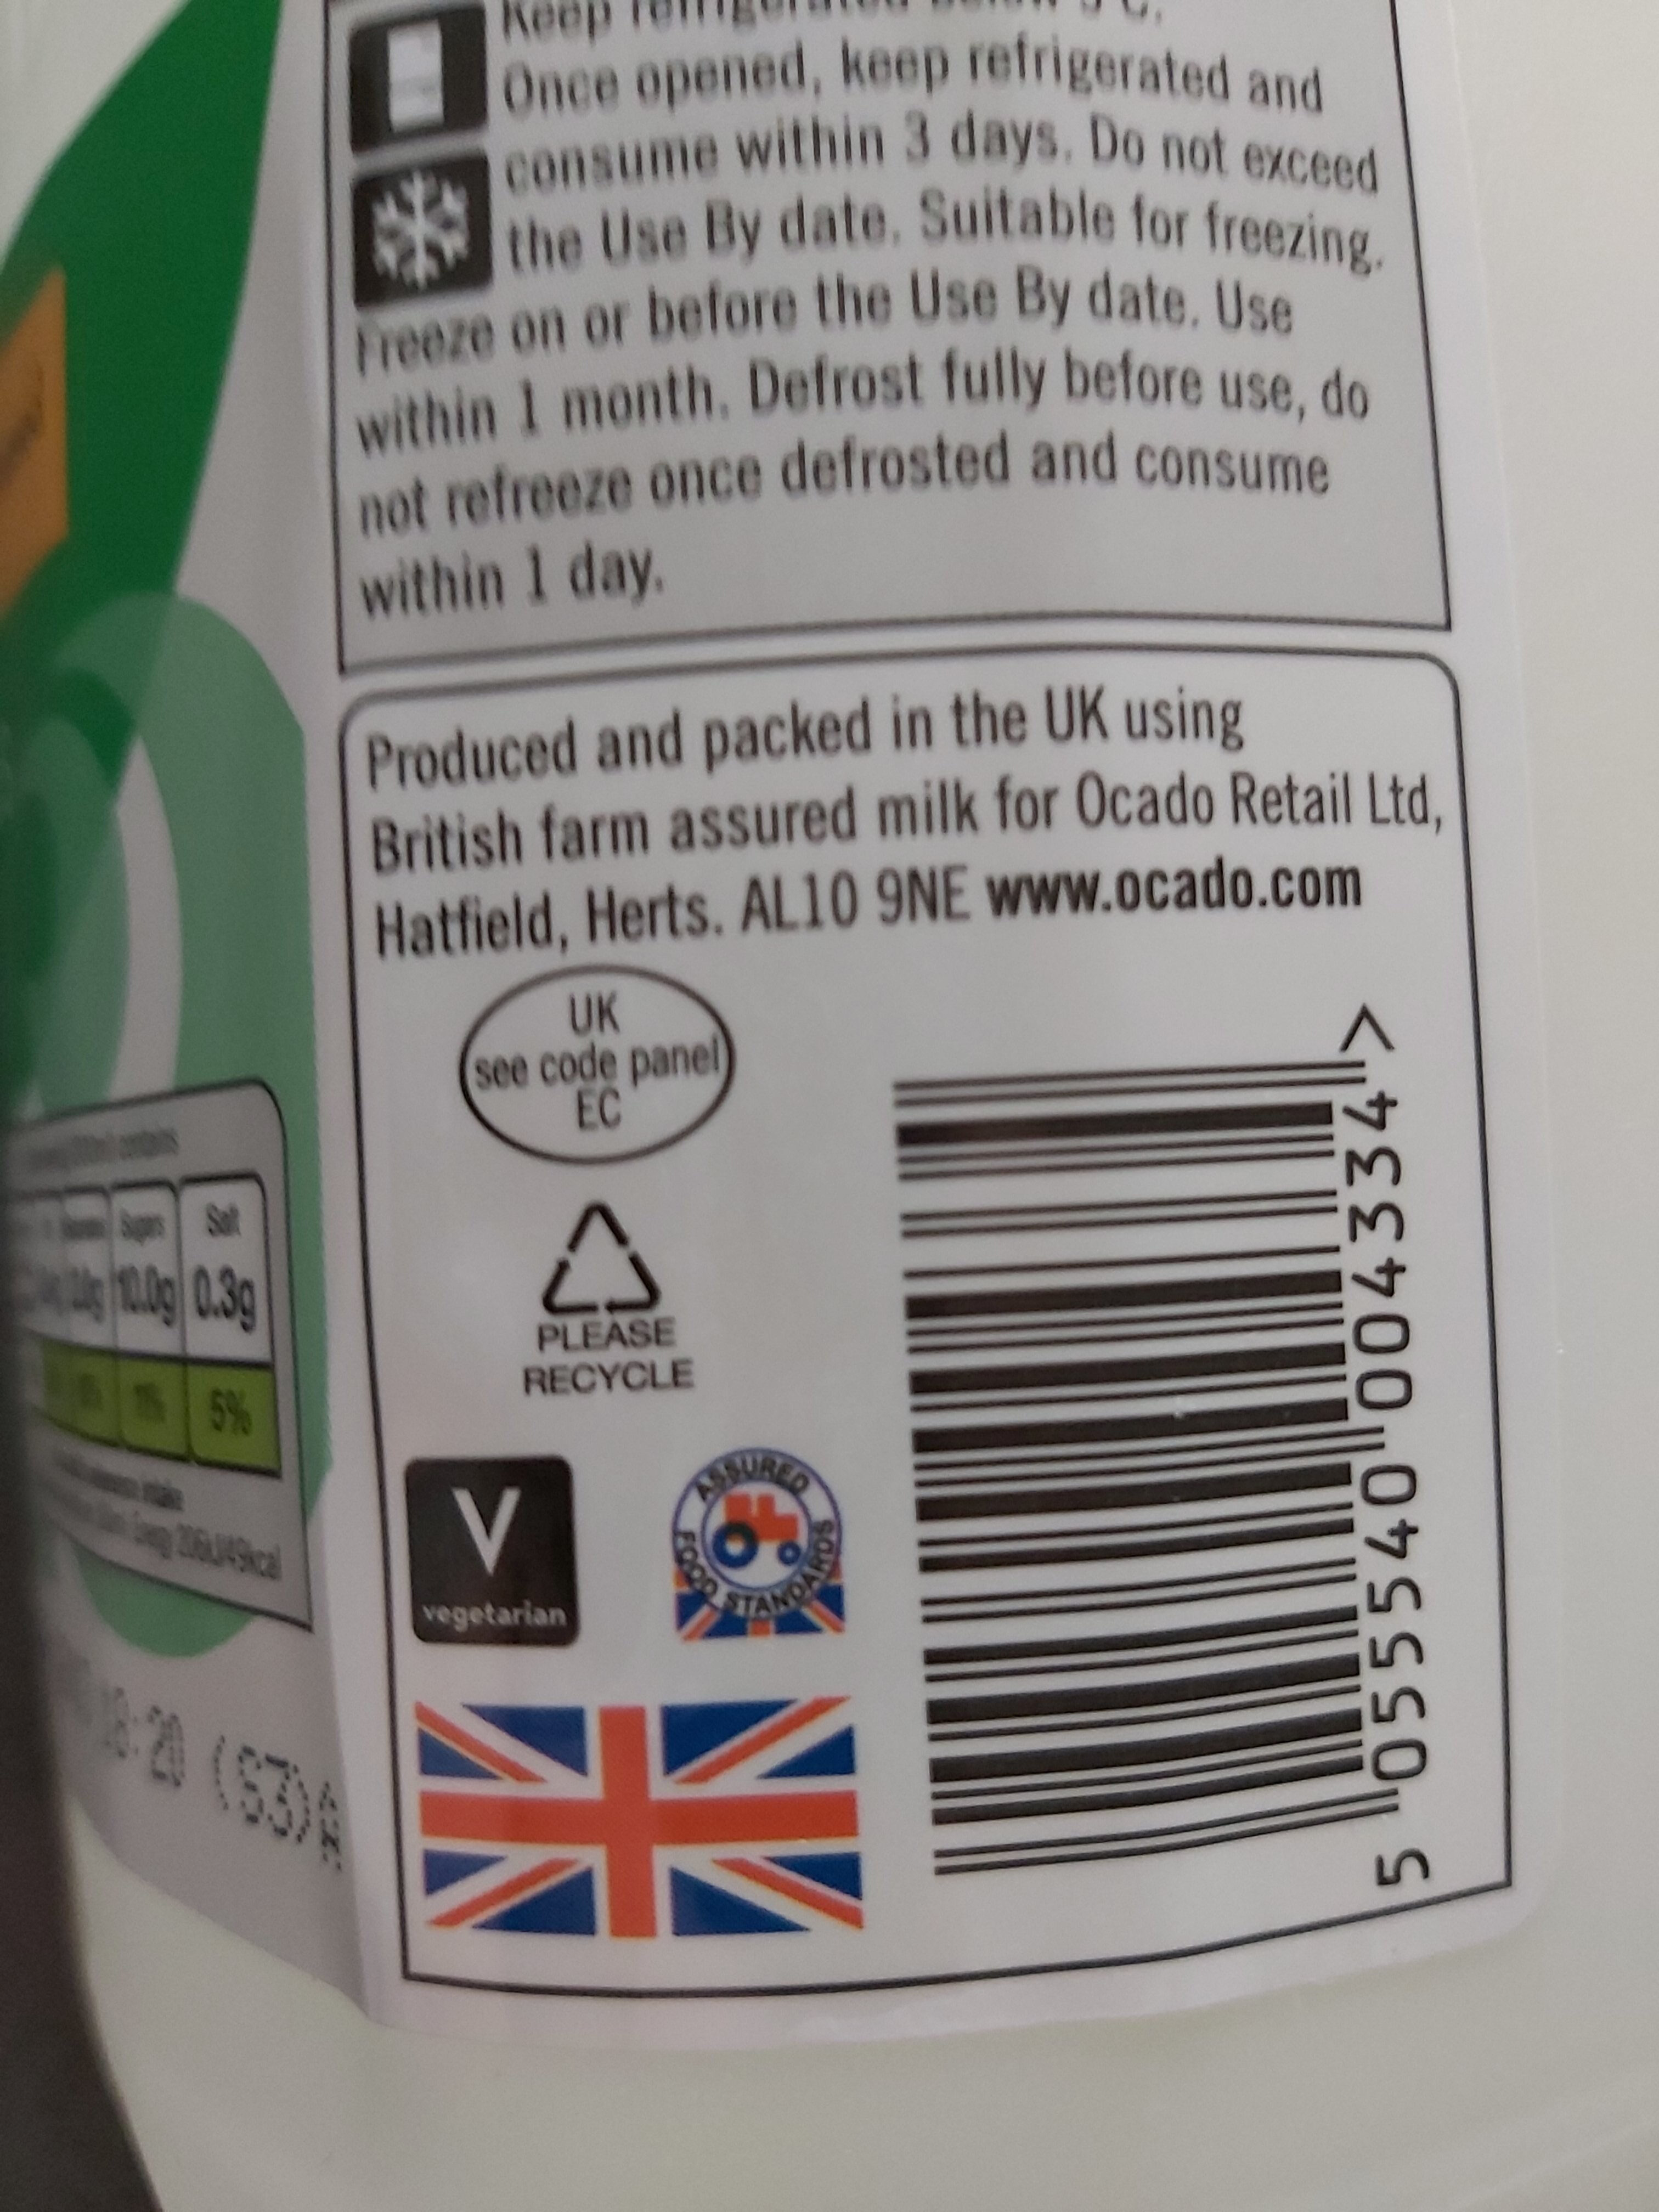 British Semi skimmed milk - Recycling instructions and/or packaging information